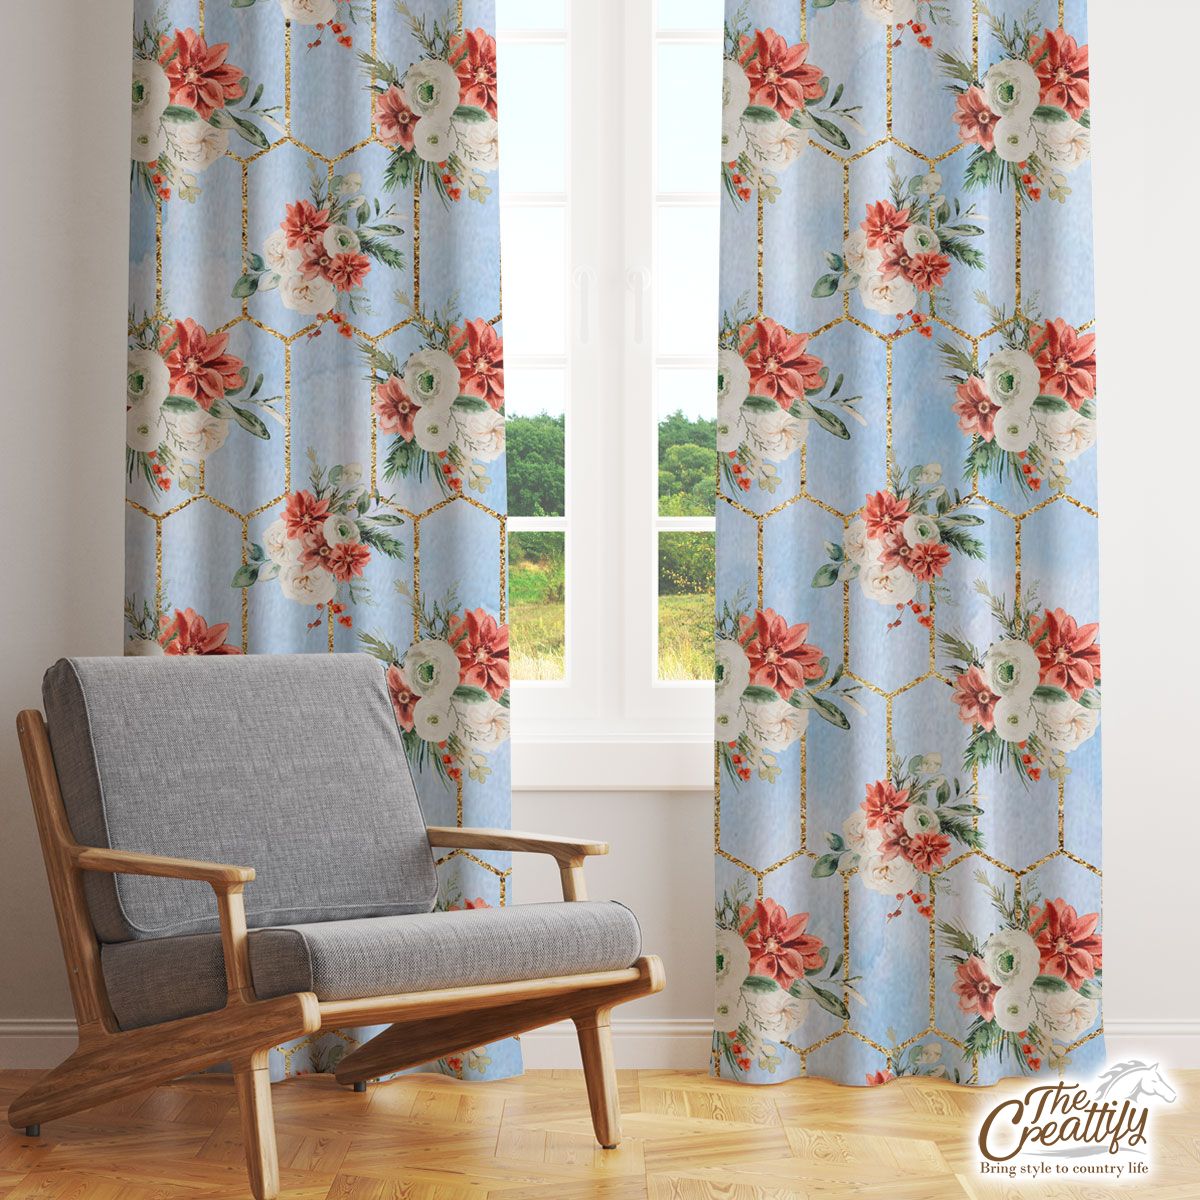 Rose Flower With Christmas Tree Branch And Mistletoe Seamless Pattern Window Curtain